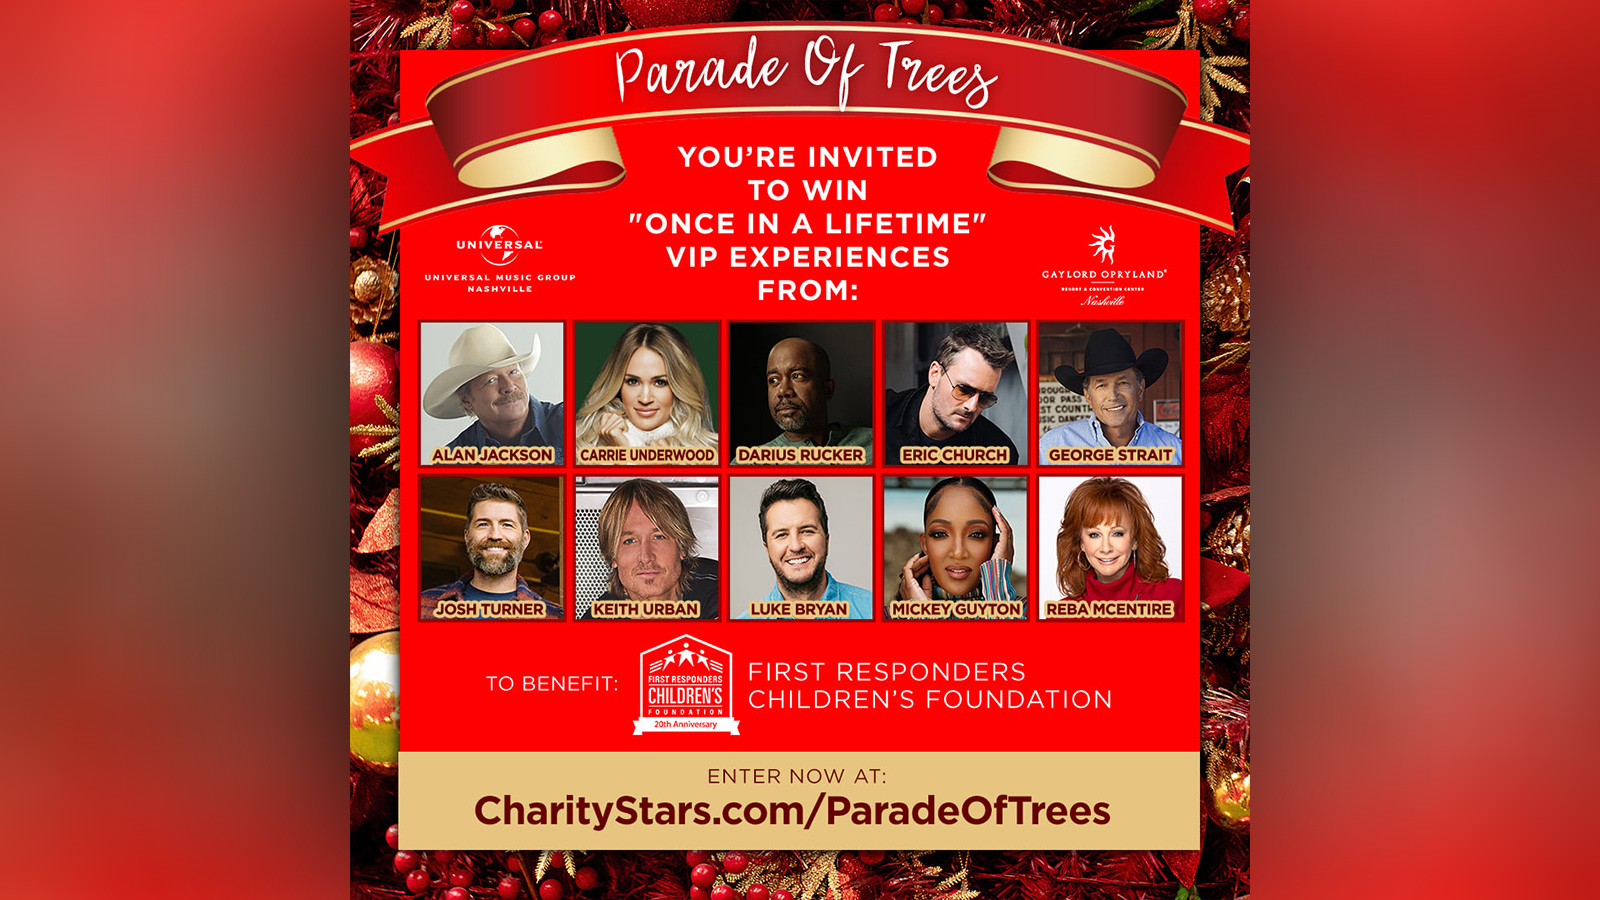 Universal Music Group Nashville hosts Parade of Trees display to benefit First Responders Children’s Foundation